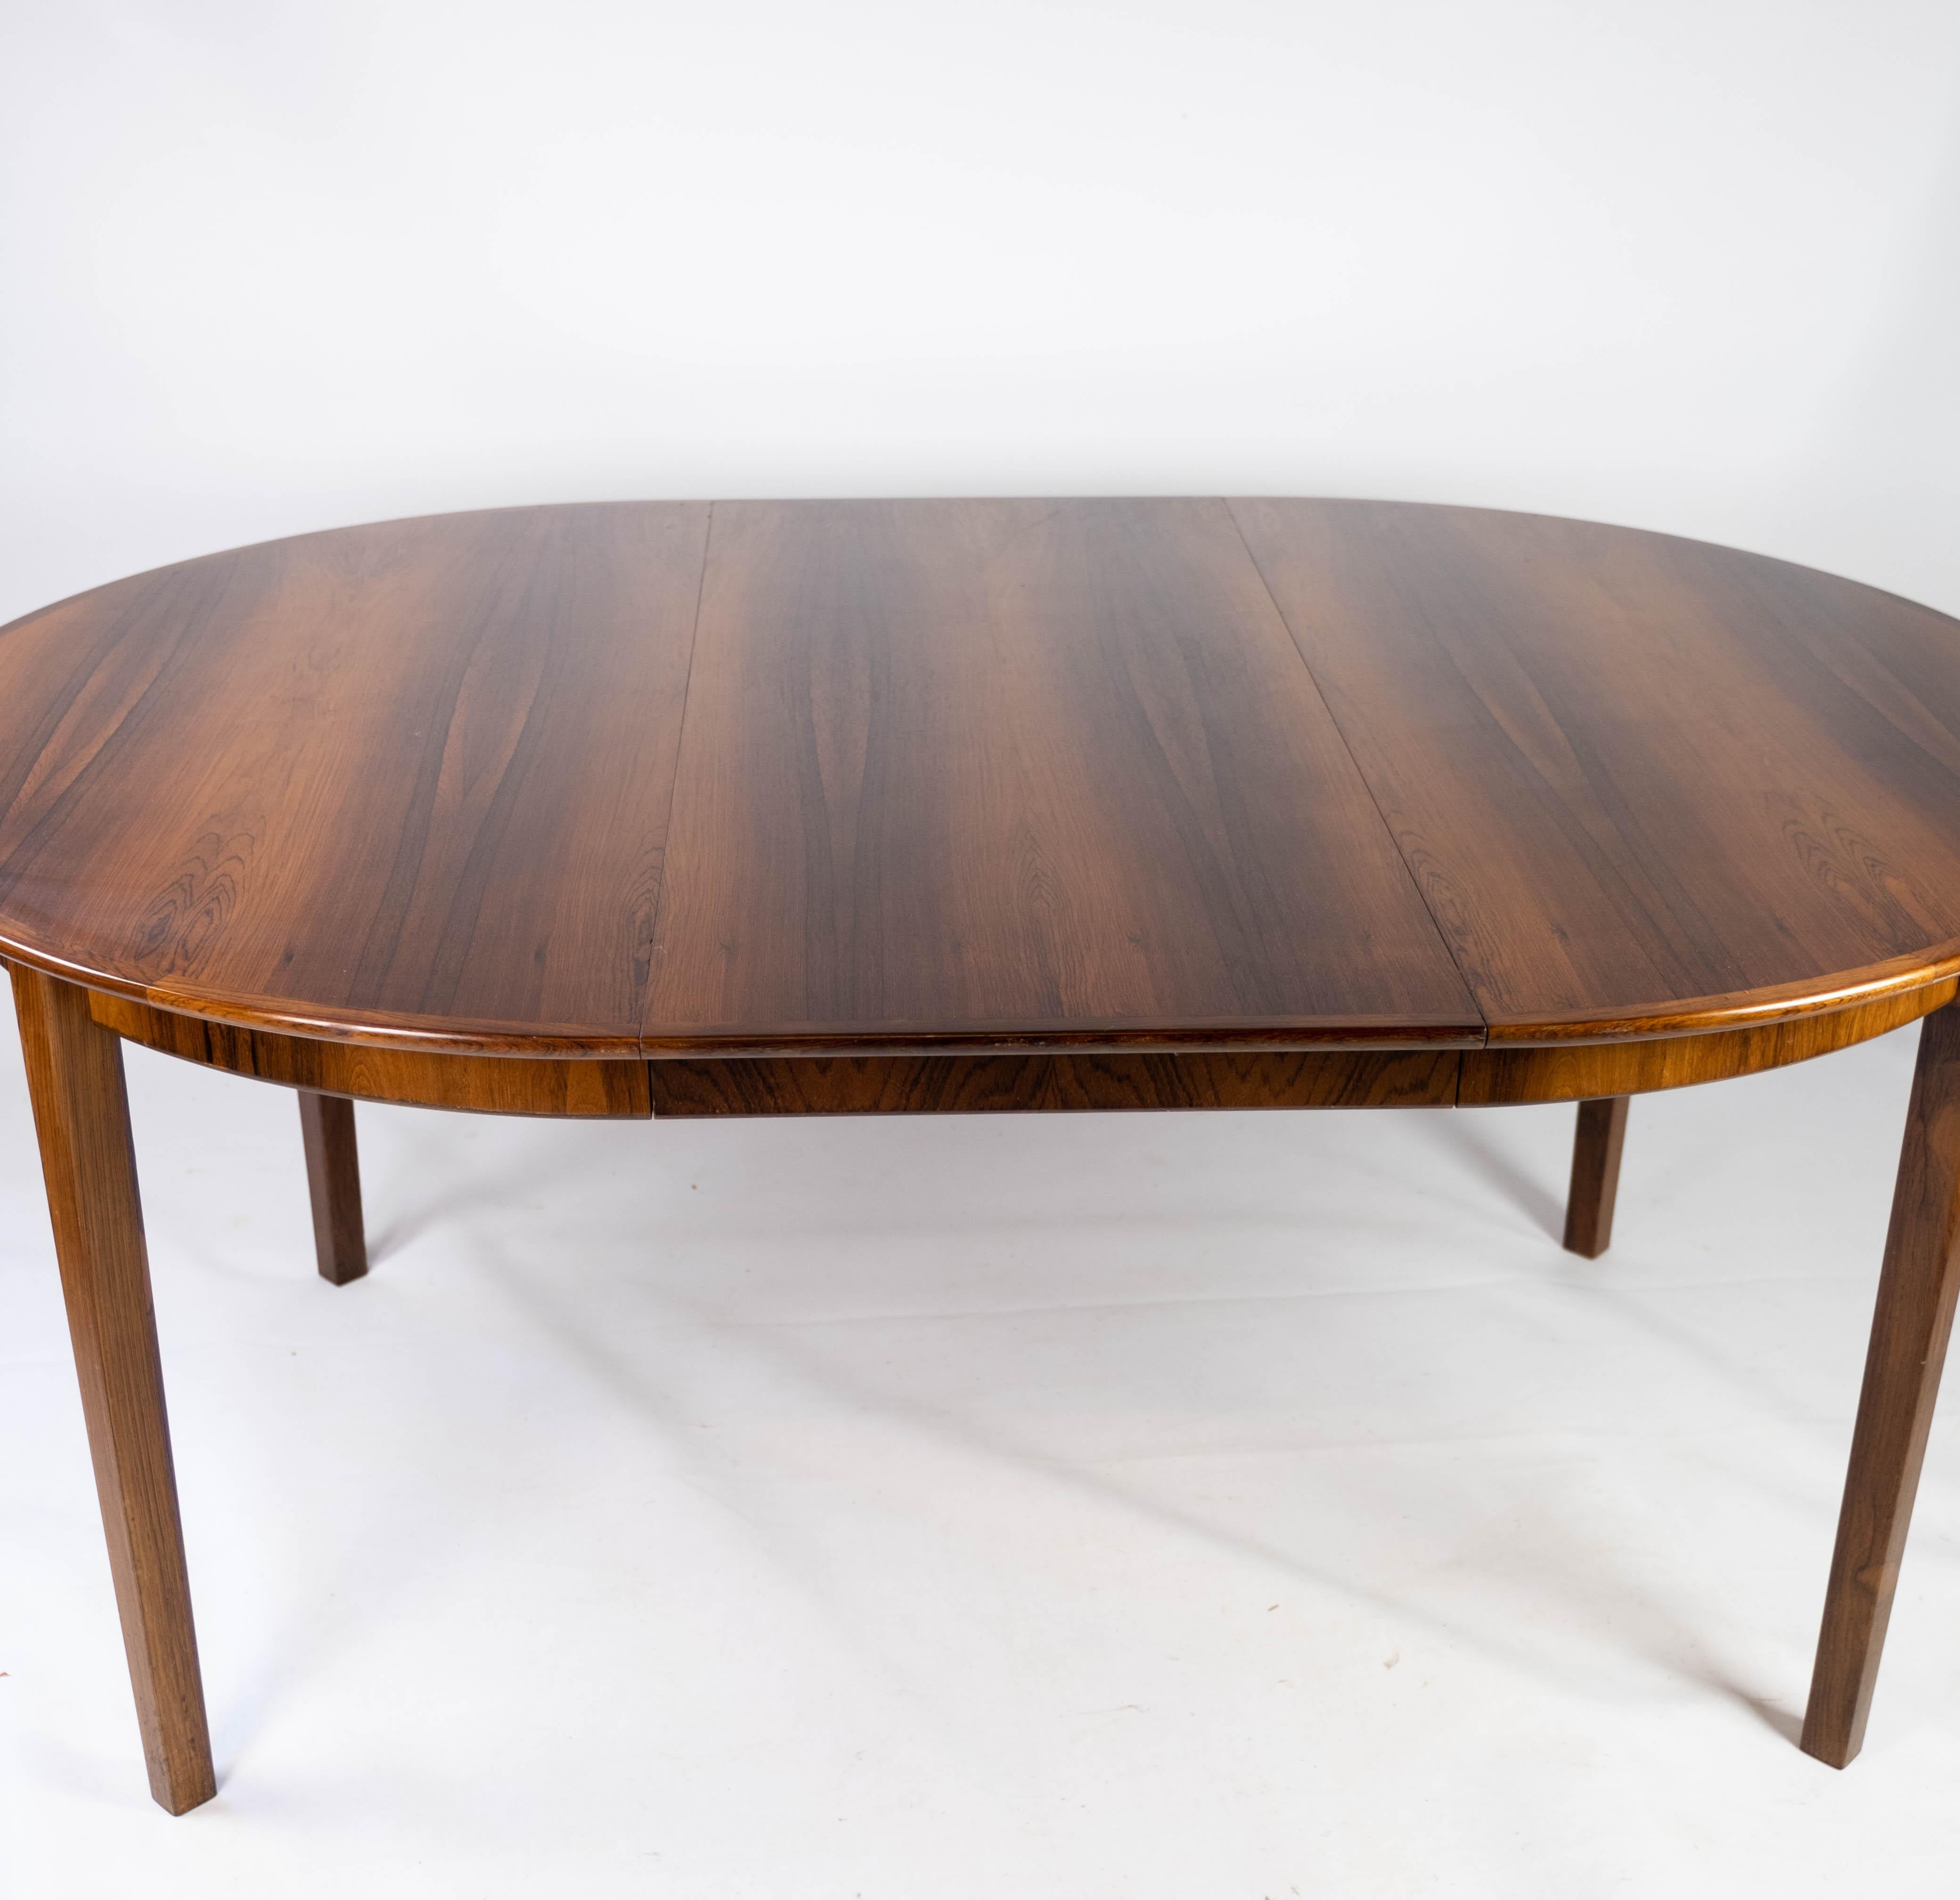 Dining Table Made In Rosewood With Extension Plates, Danish Design From 1960s For Sale 5